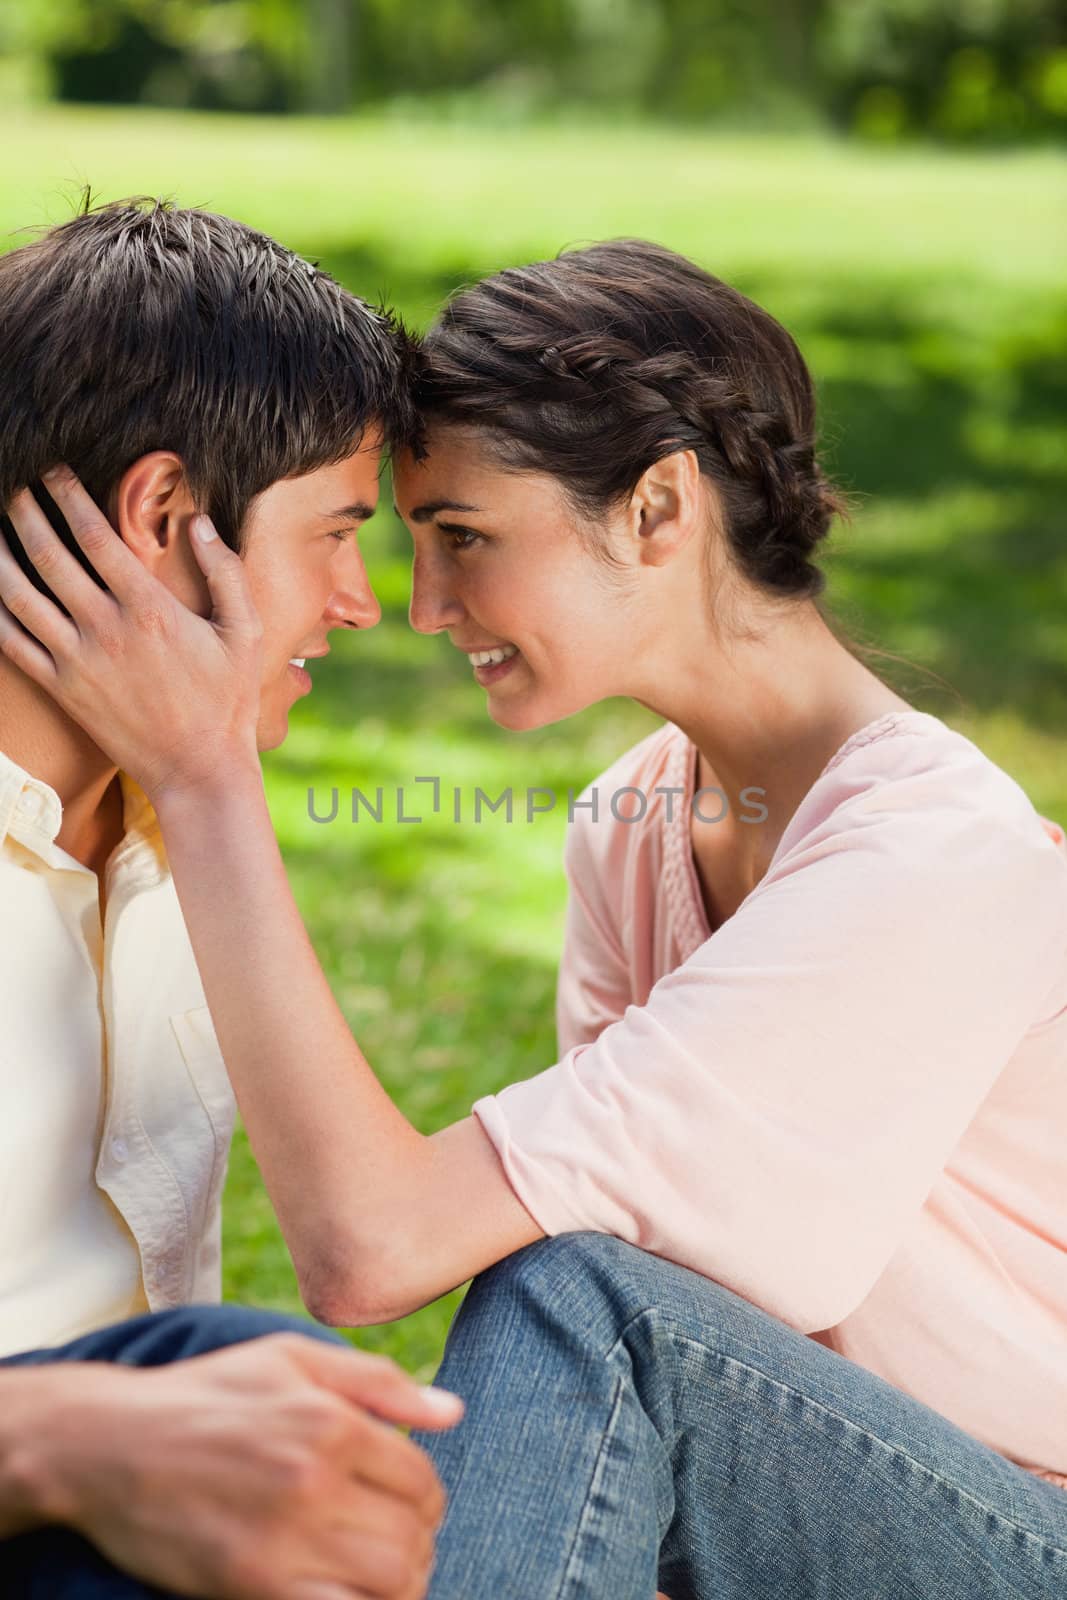 Woman smiling as she looks at her friend while they touch their heads together in a park